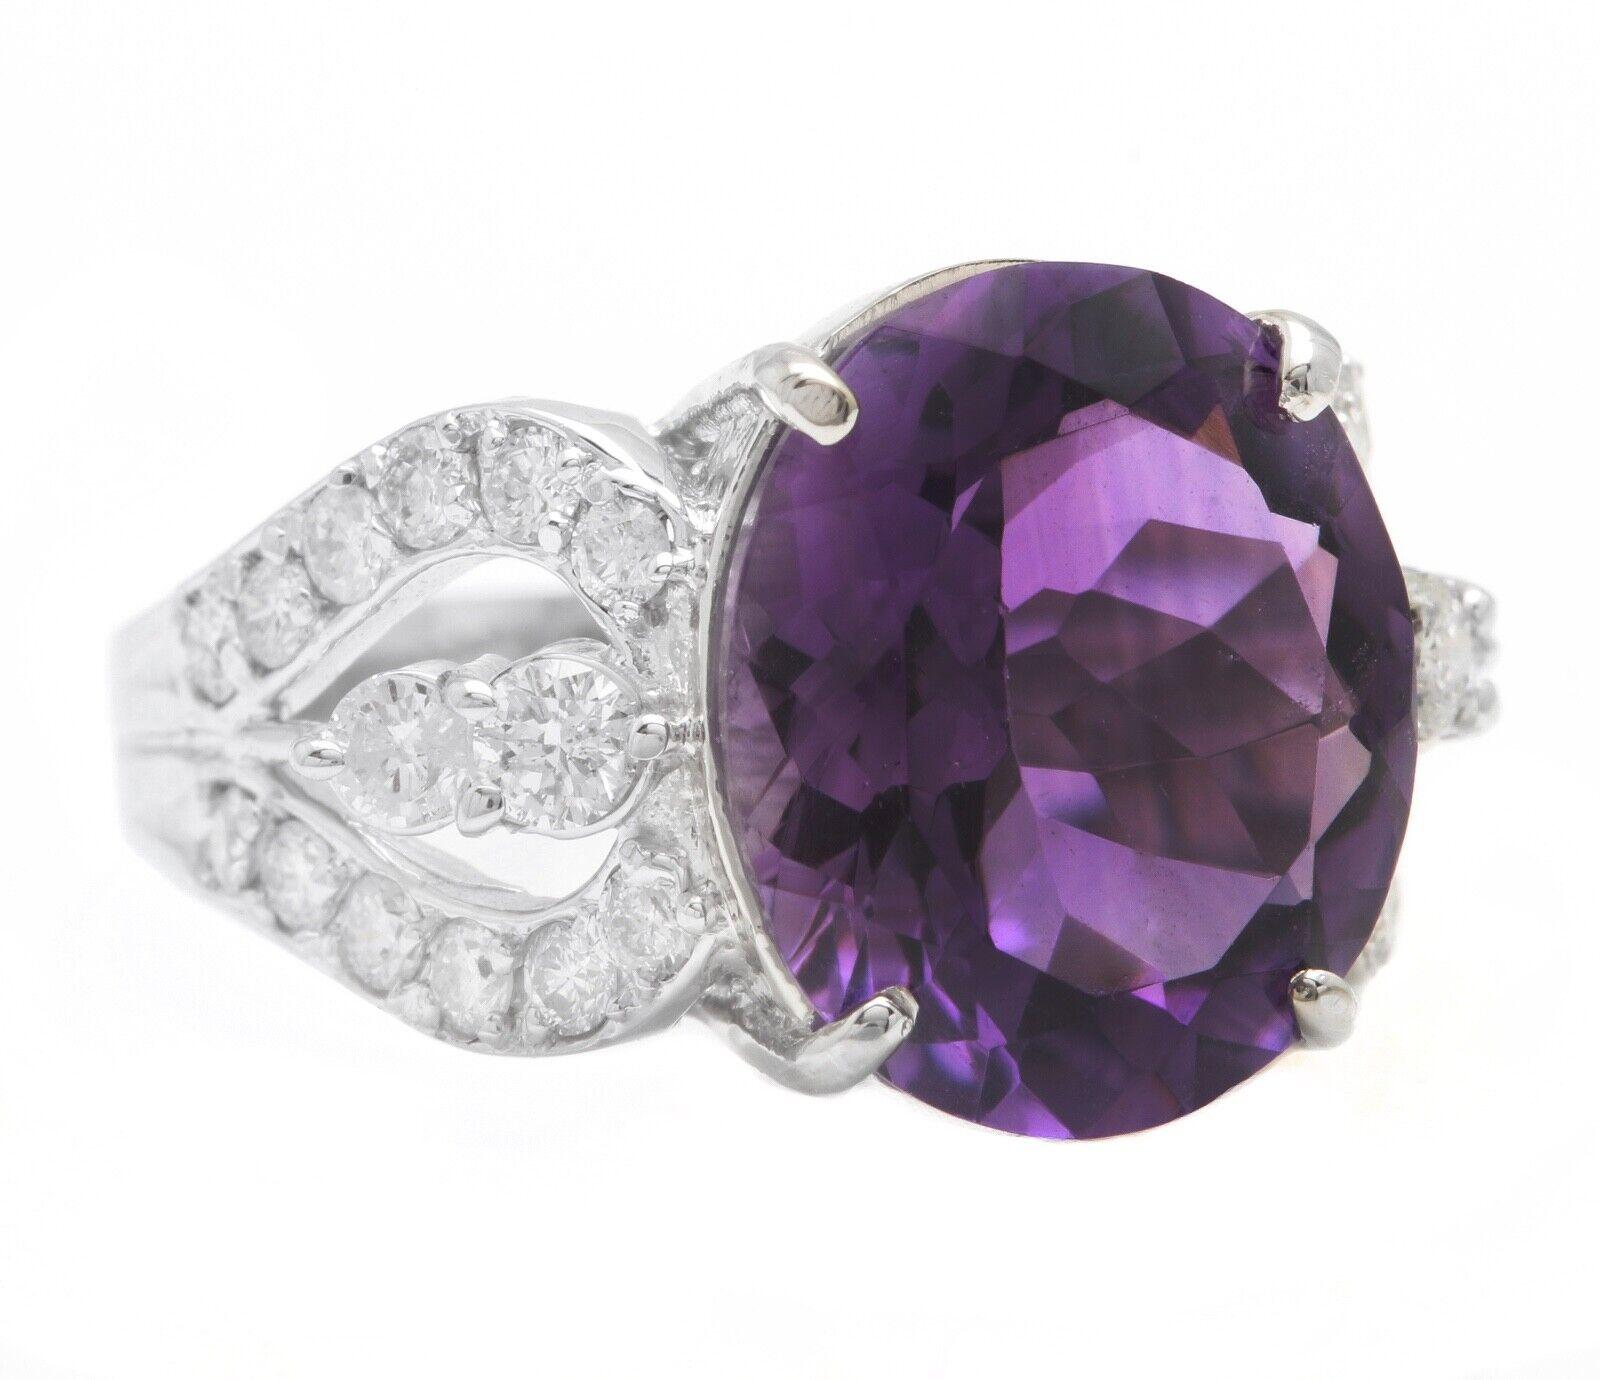 7.50 Carats Natural Amethyst and Diamond 14K Solid White Gold Ring

Suggested Replacement Value: $6,000.00

Total Natural Oval Cut Amethyst Weights: Approx. 6.50 Carats 

Amethyst Measures: Approx. 14.00 x 12.00mm

Natural Round Diamonds Weight: